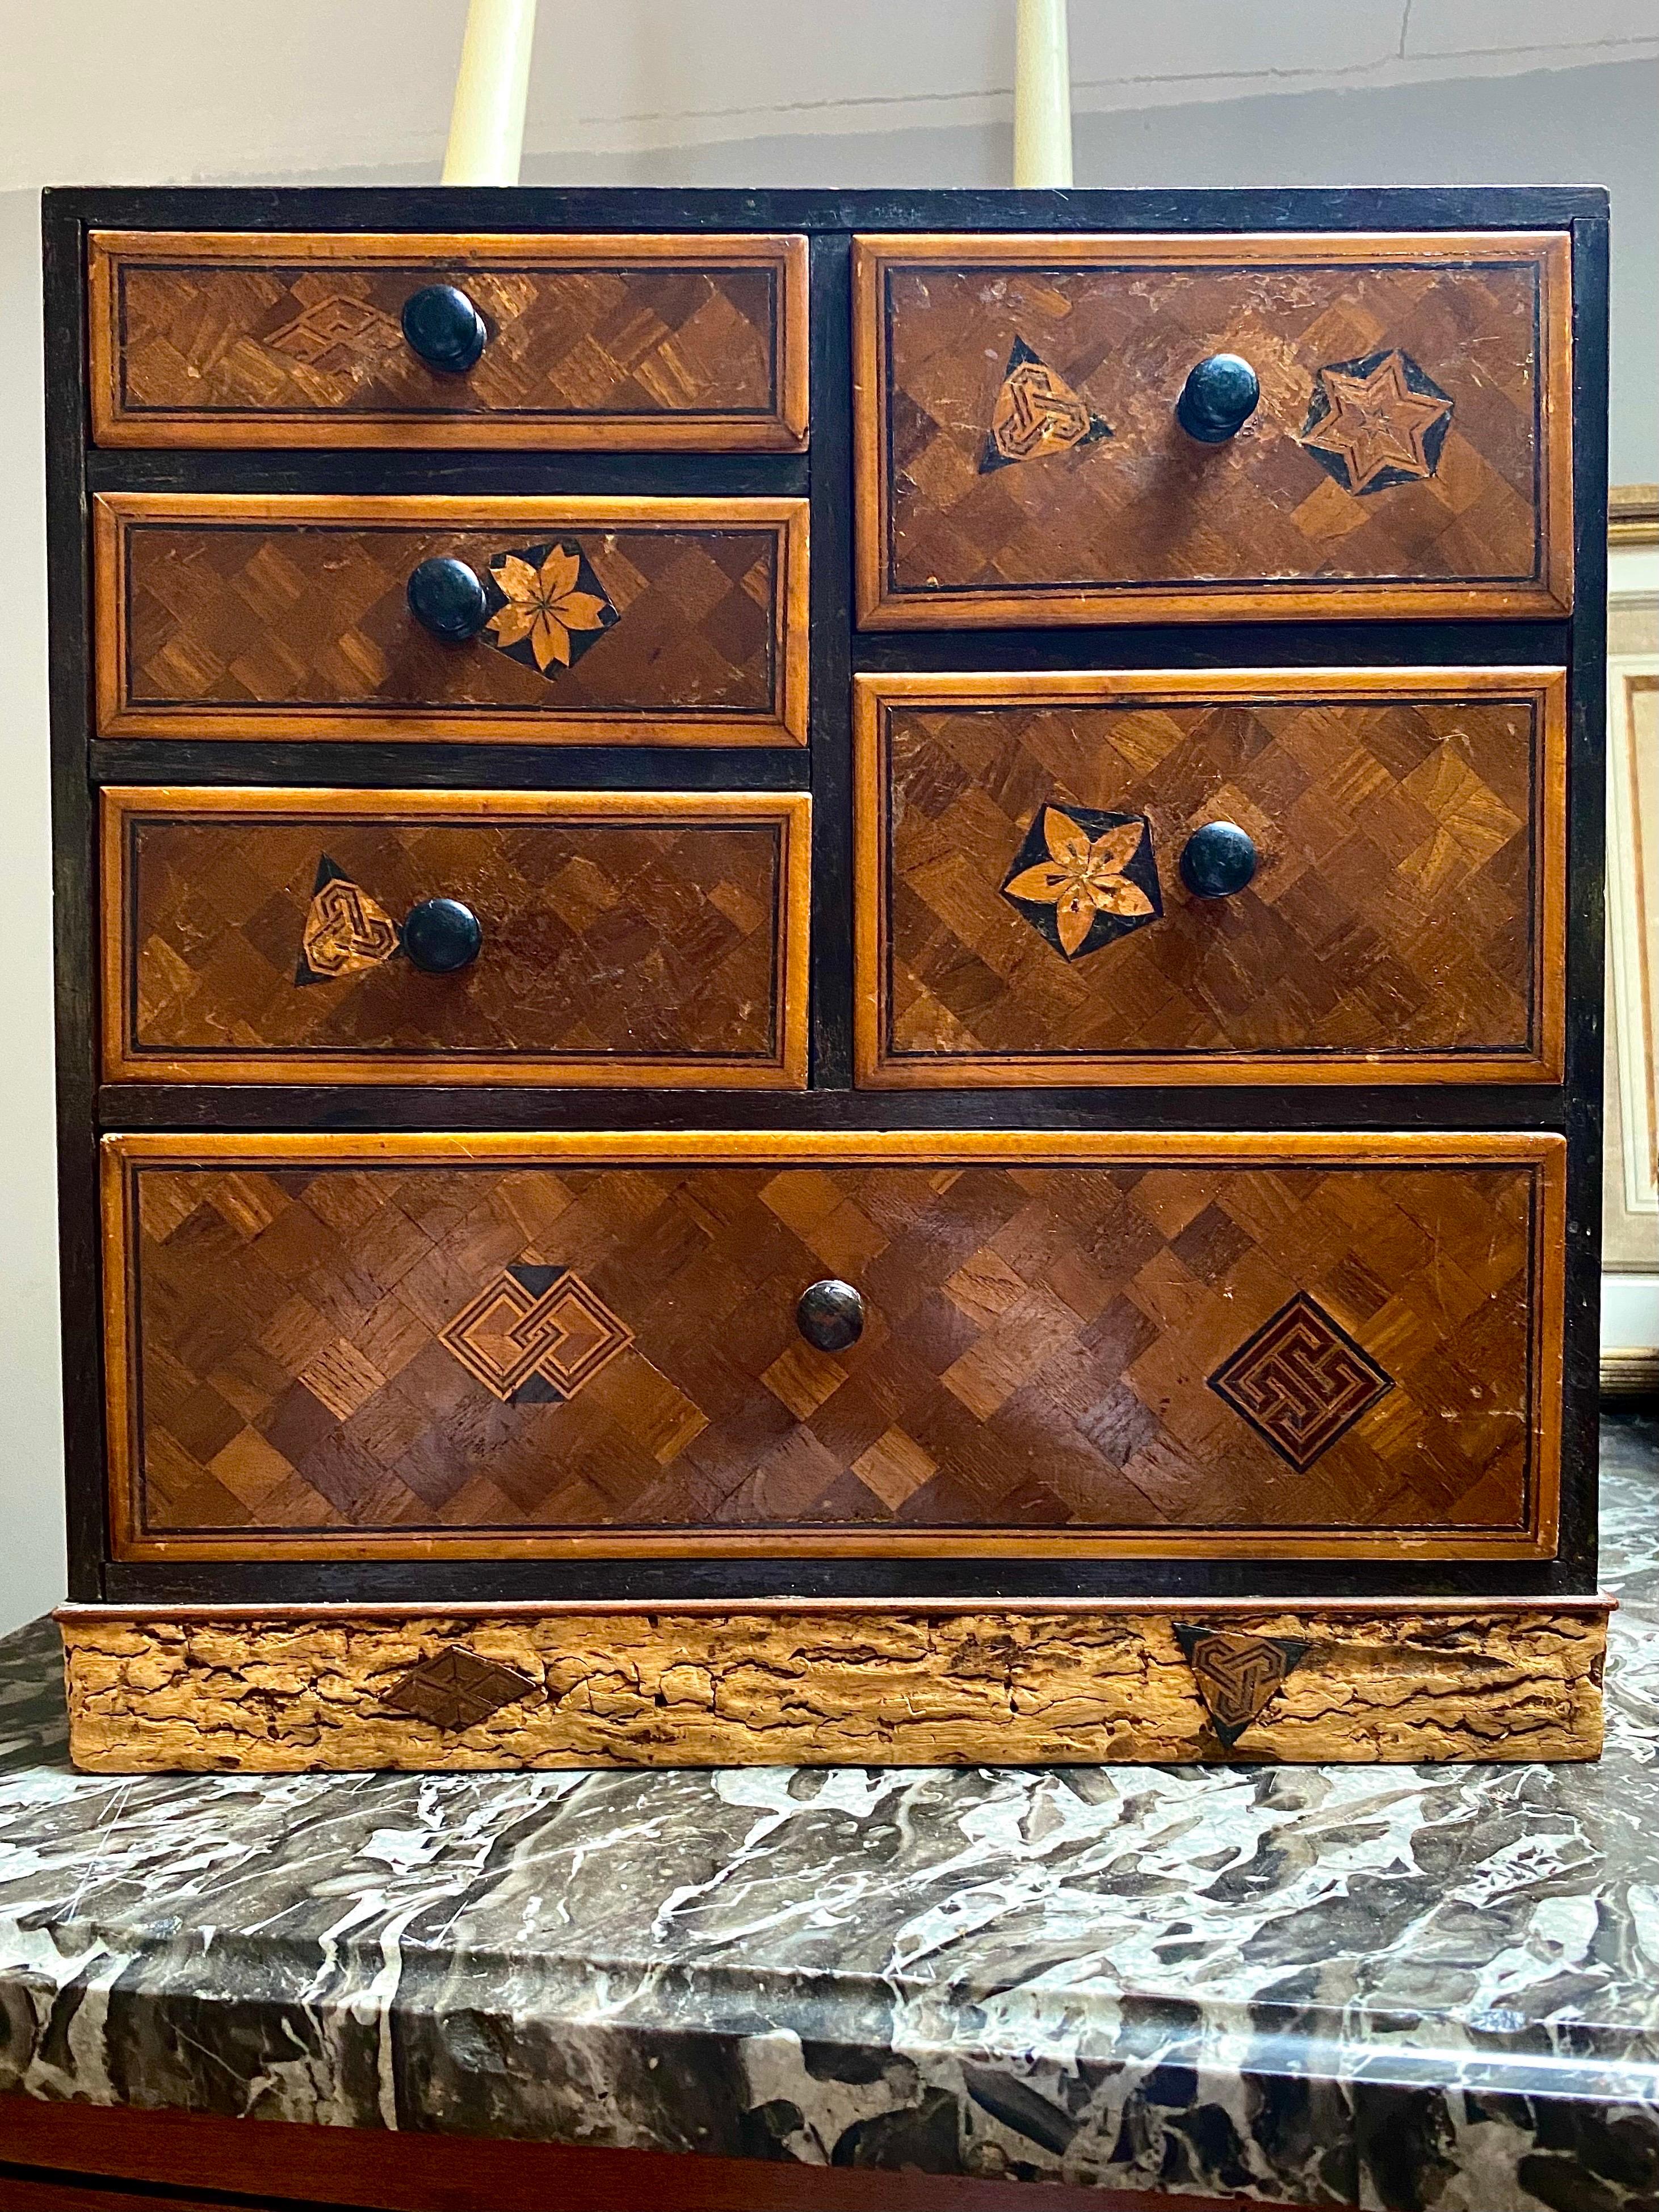 Very beautiful Japanese jewelry cabinet in Yosegi-zaiku marquetry composed of six drawers. The whole is inlaid with geometrically shaped pieces of wood and decorated with motifs resembling kamon (clan or Japanese family weapons). The leg of the